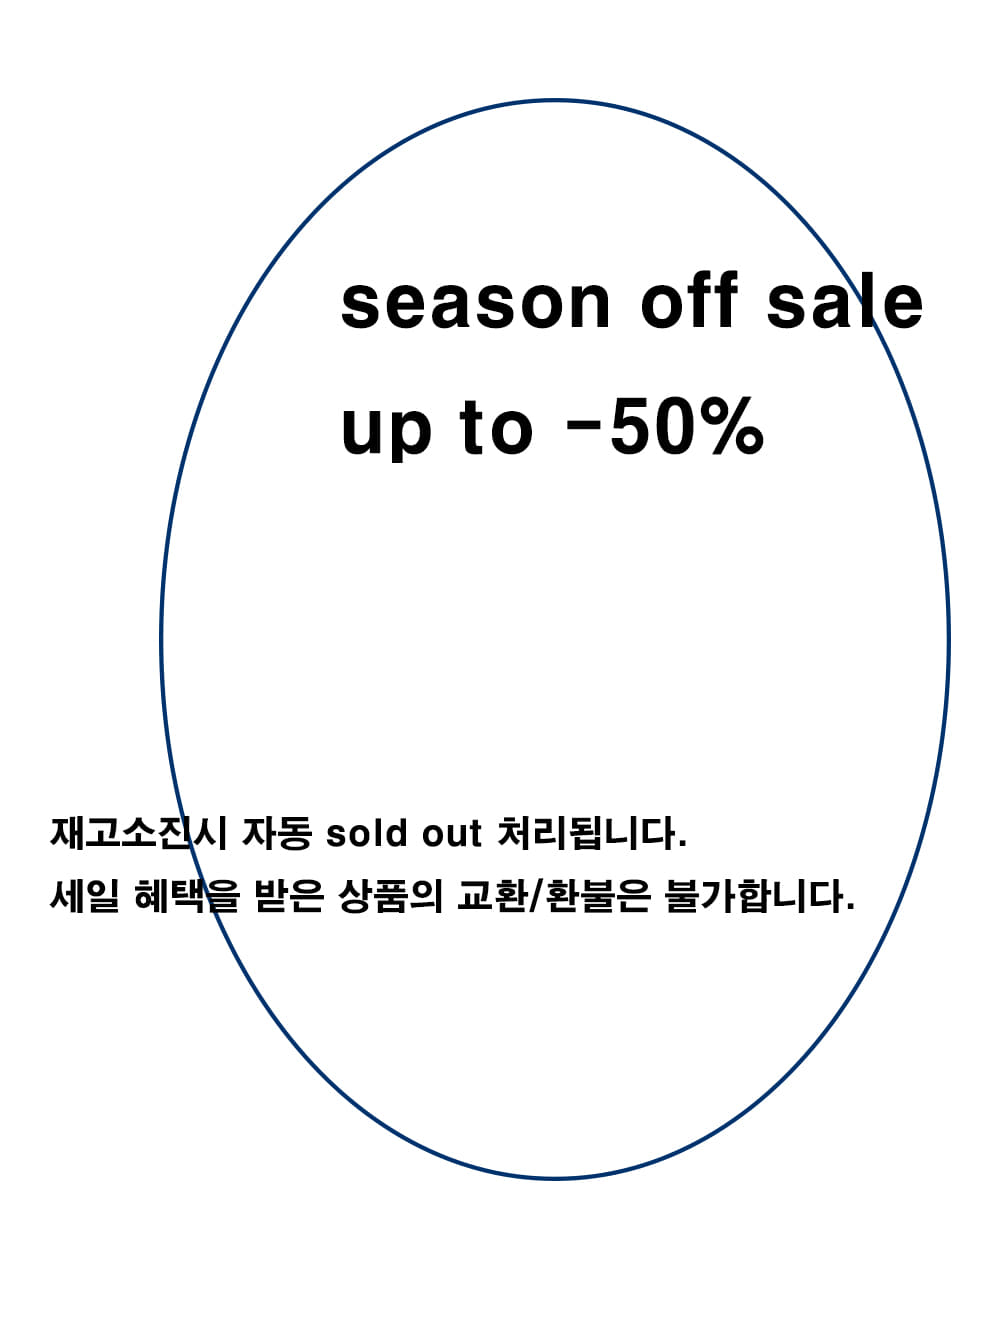 SALE UP TO ~ 50%